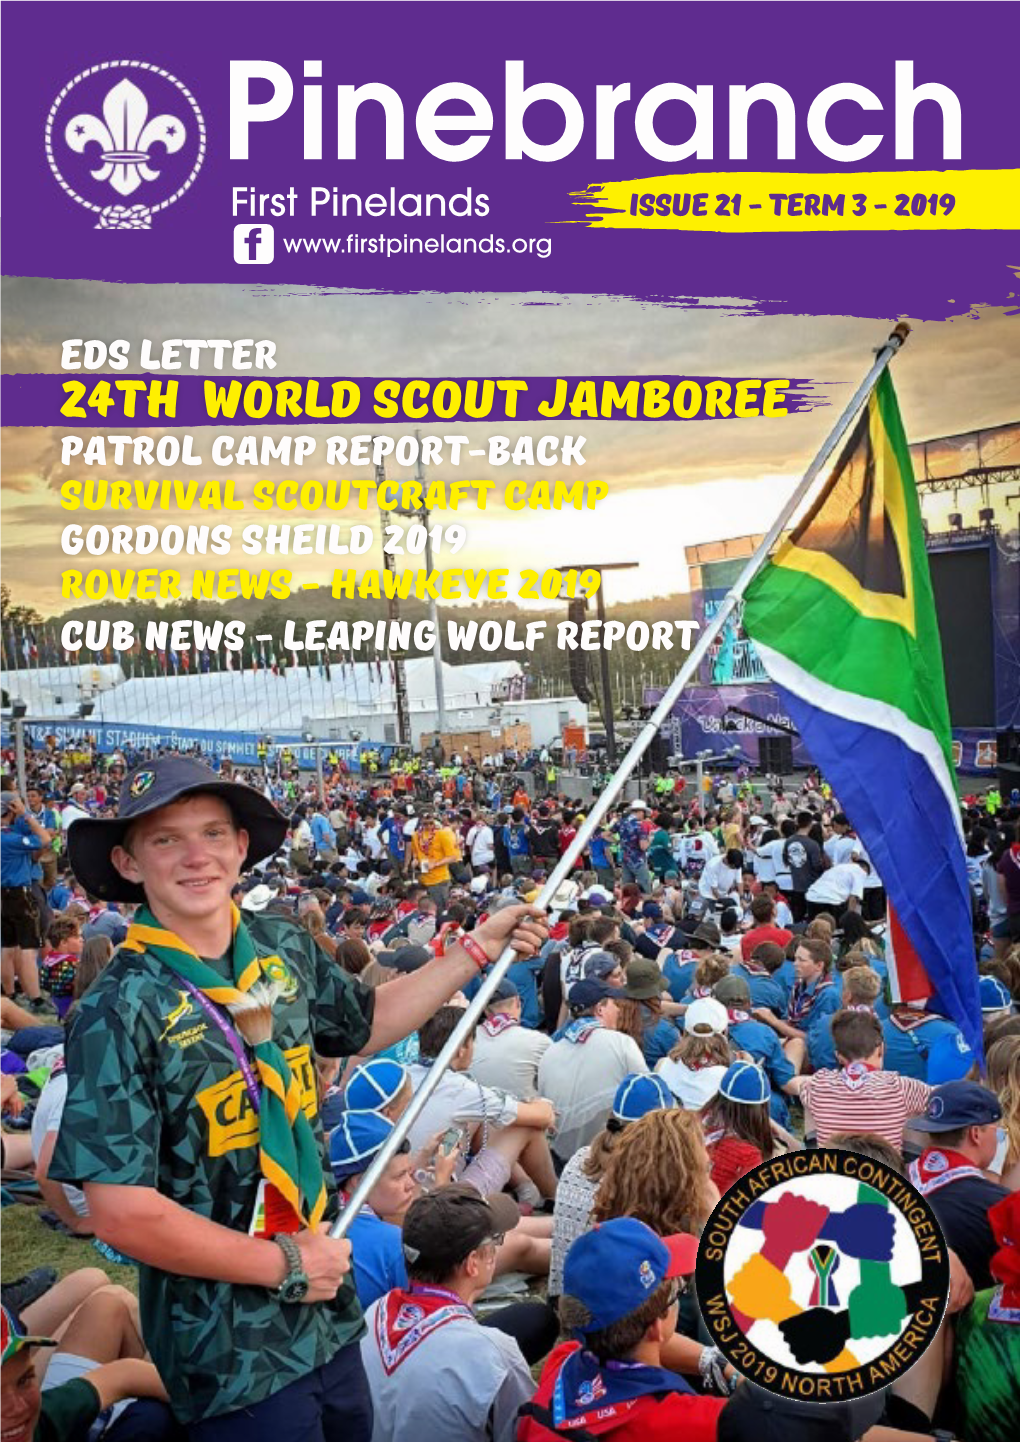 24Th World Scout Jamboree Patrol Camp Report-Back Survival Scoutcraft Camp GORDONS SHEILD 2019 ROVER NEWS - HAWKEYE 2019 CUB NEWS - LEAPING WOLF REPORT